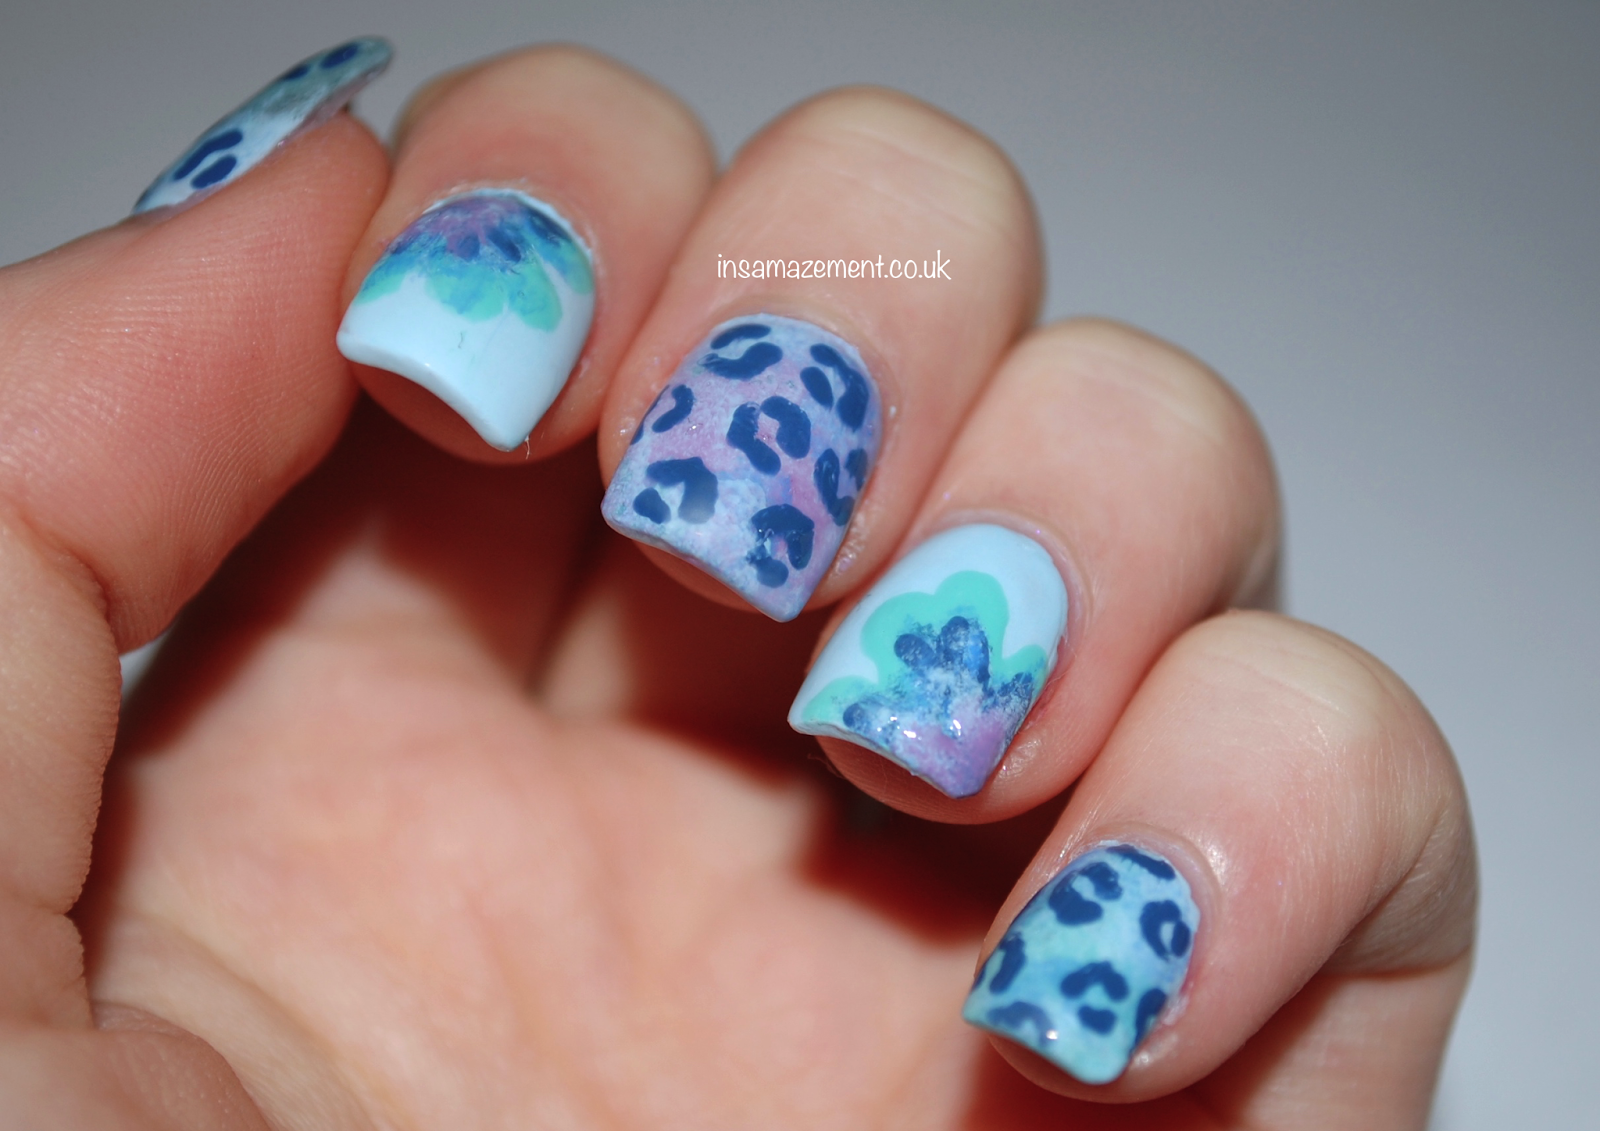 9. Nail Art Competition: Tips for Creating a Winning Portfolio - wide 5